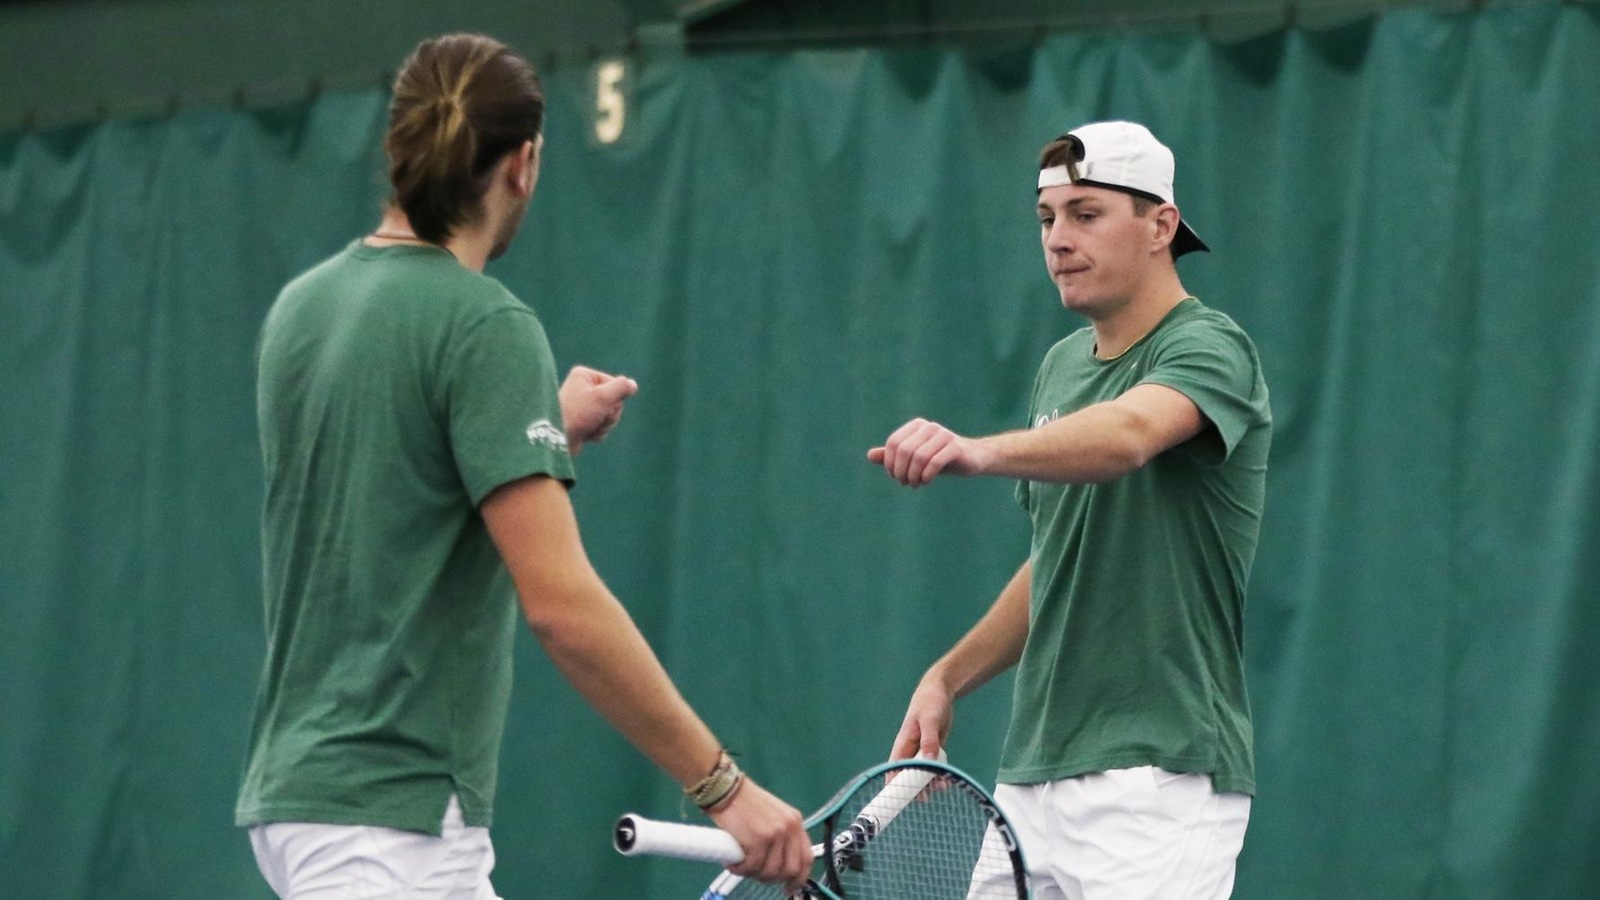 Mindry & Terry Pick Up #HLMTEN Doubles Team of the Week Honors